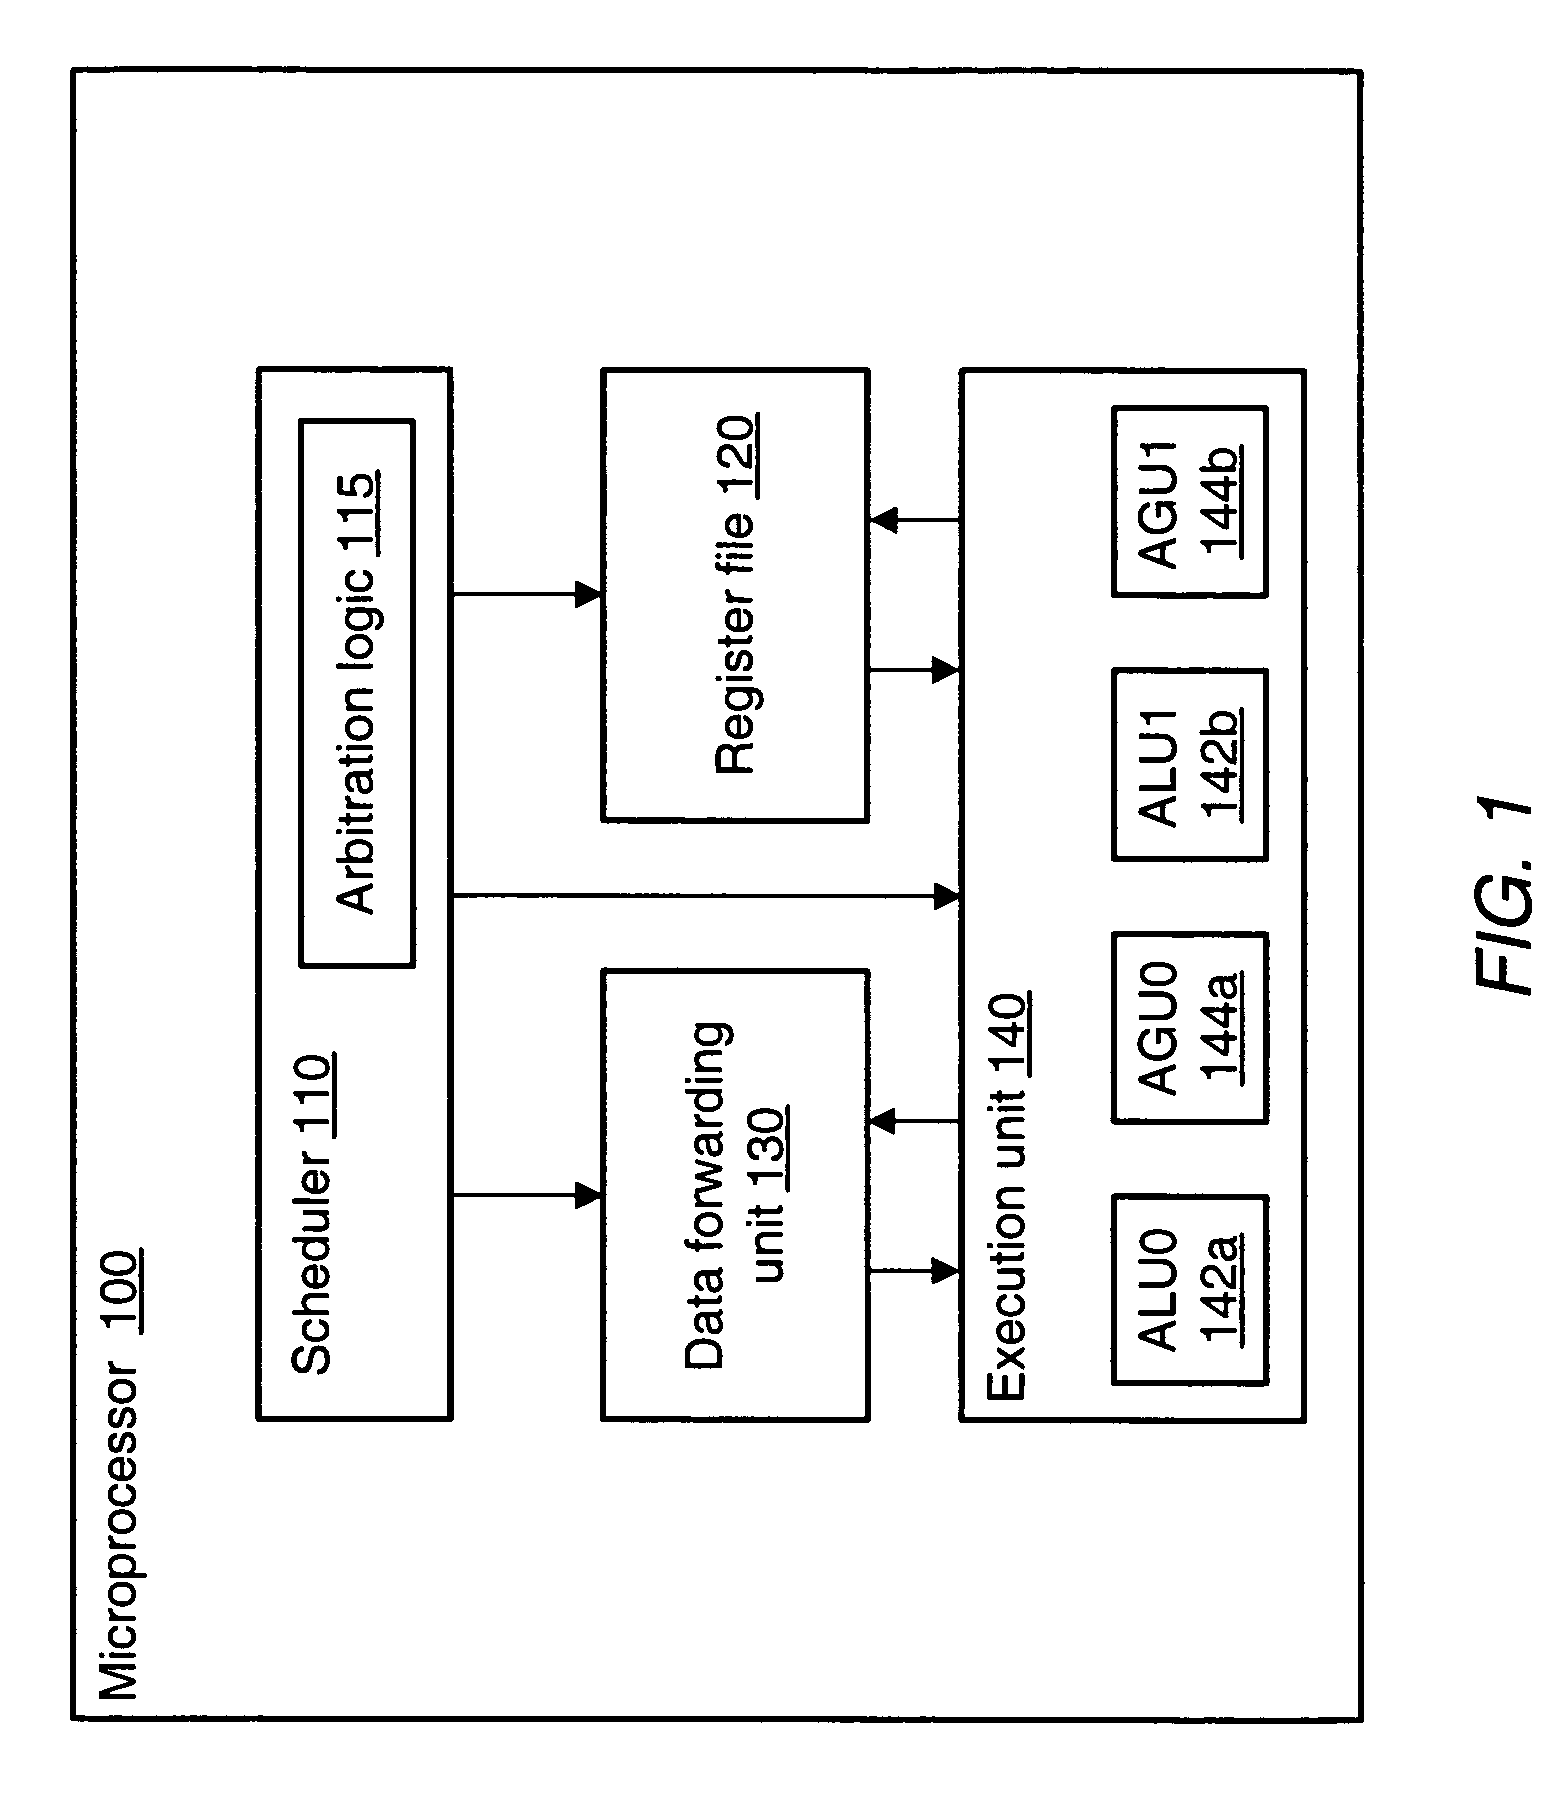 Apparatus and method for port arbitration in a register file on the basis of functional unit issue slots